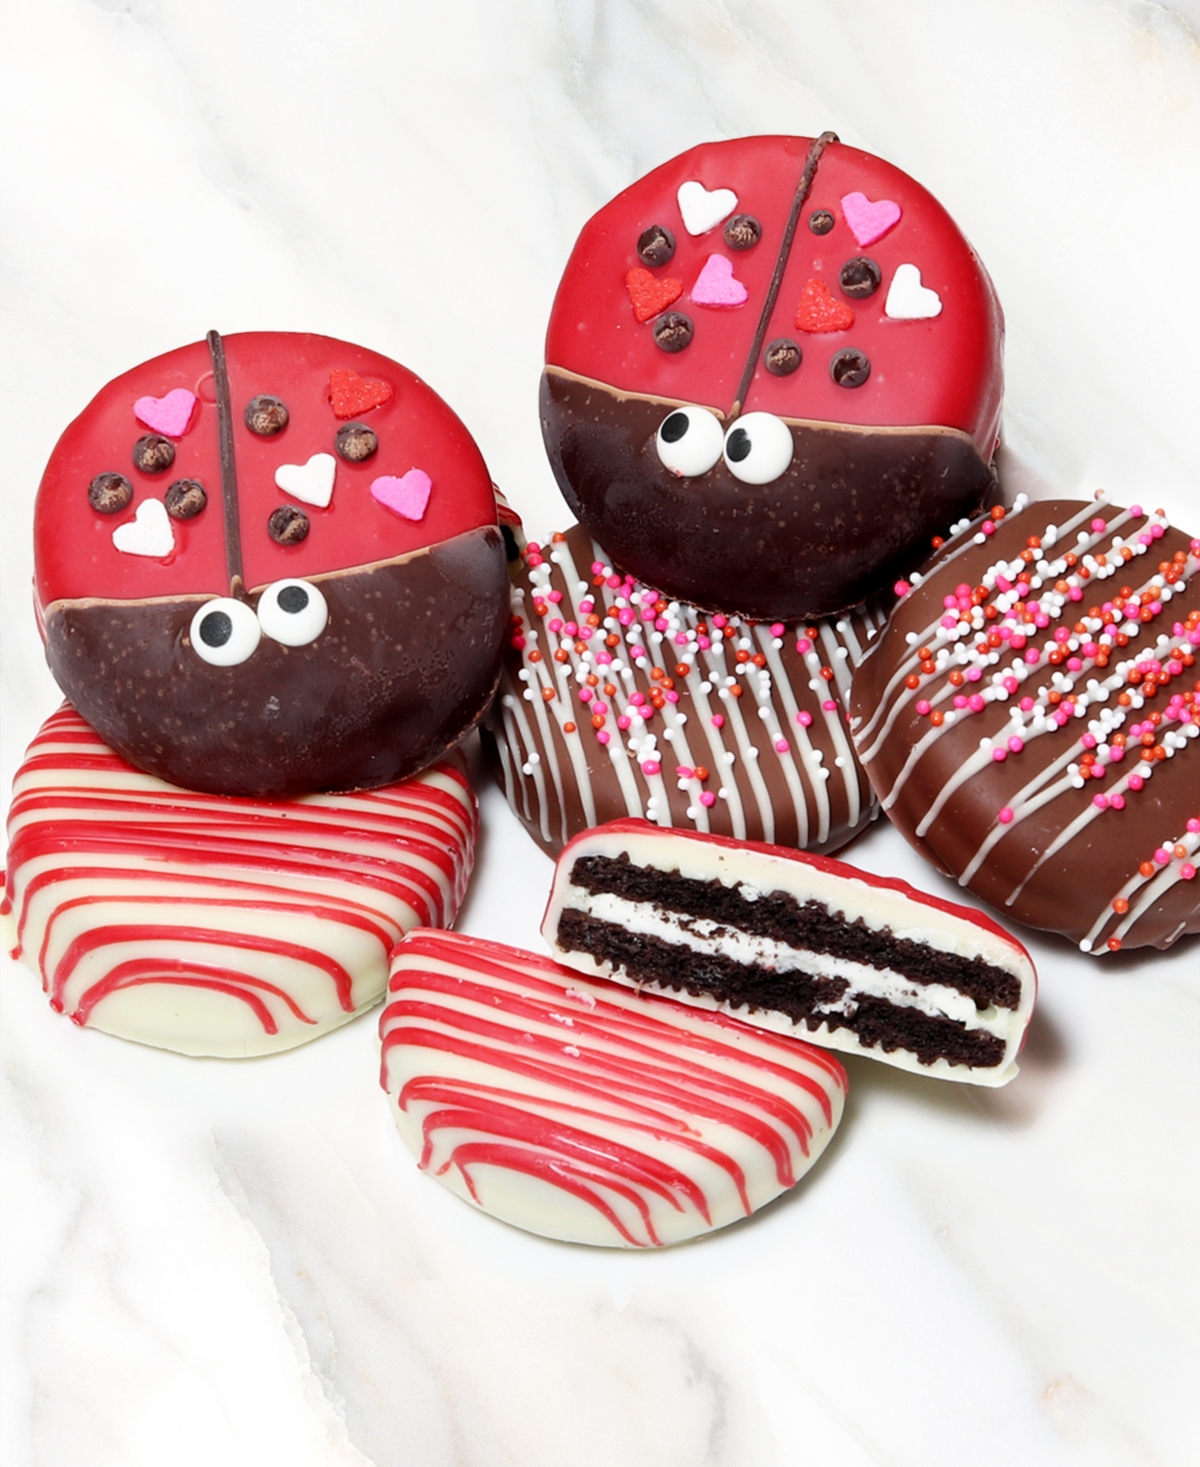 Shop Chocolate Covered Company Love Bug Belgian Chocolate Covered Strawberries And Oreo Cookies In No Color